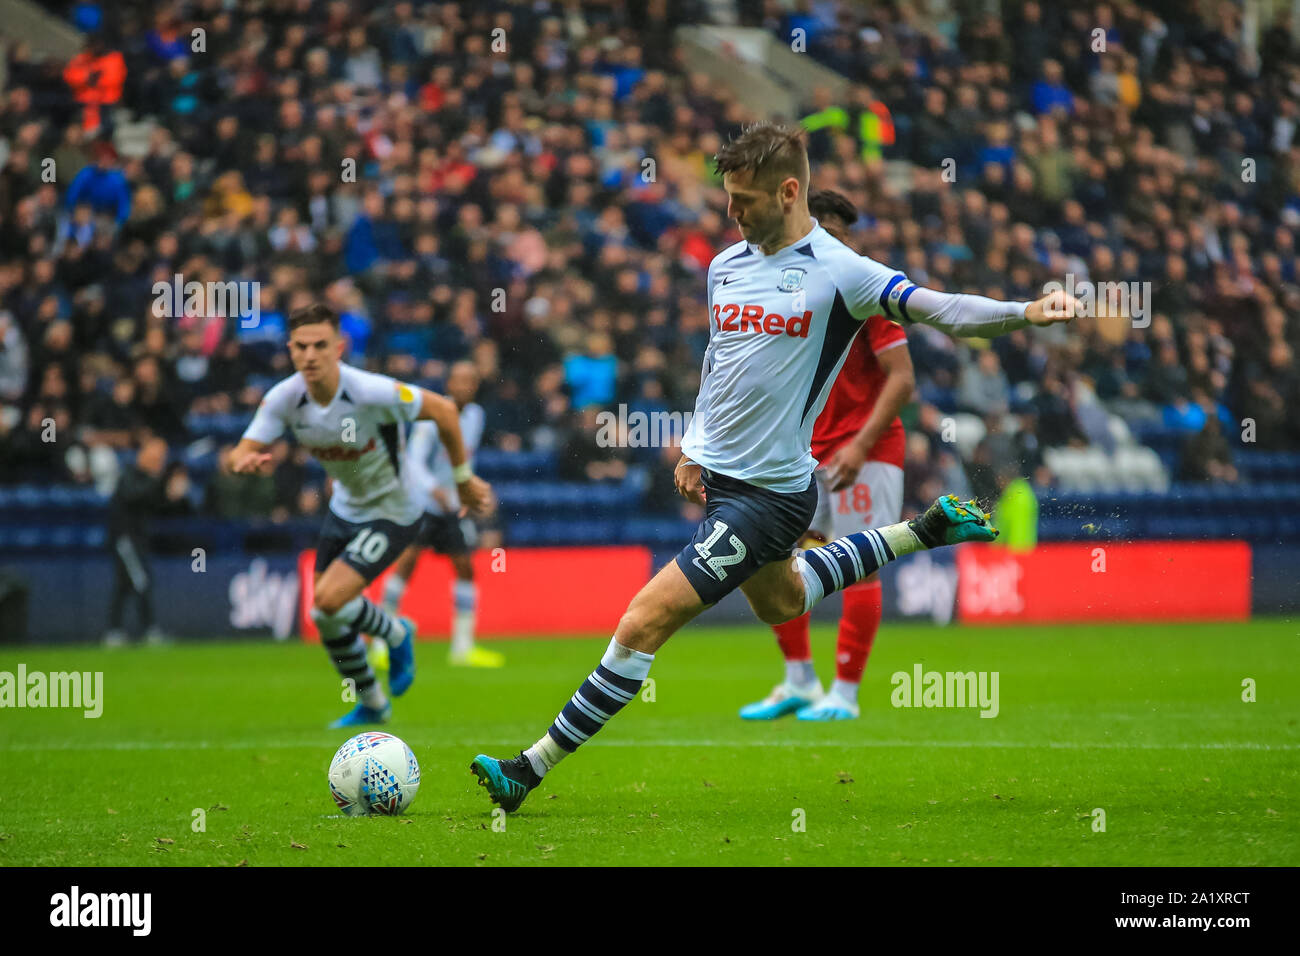 28th September 2019, Deepdale, Preston, England; Sky Bet Championship, Preston North End v Bristol City : Paul Gallagher (12) of Preston North End scores a penalty to make it 1-2 Credit: Craig Milner/News Images Stock Photo